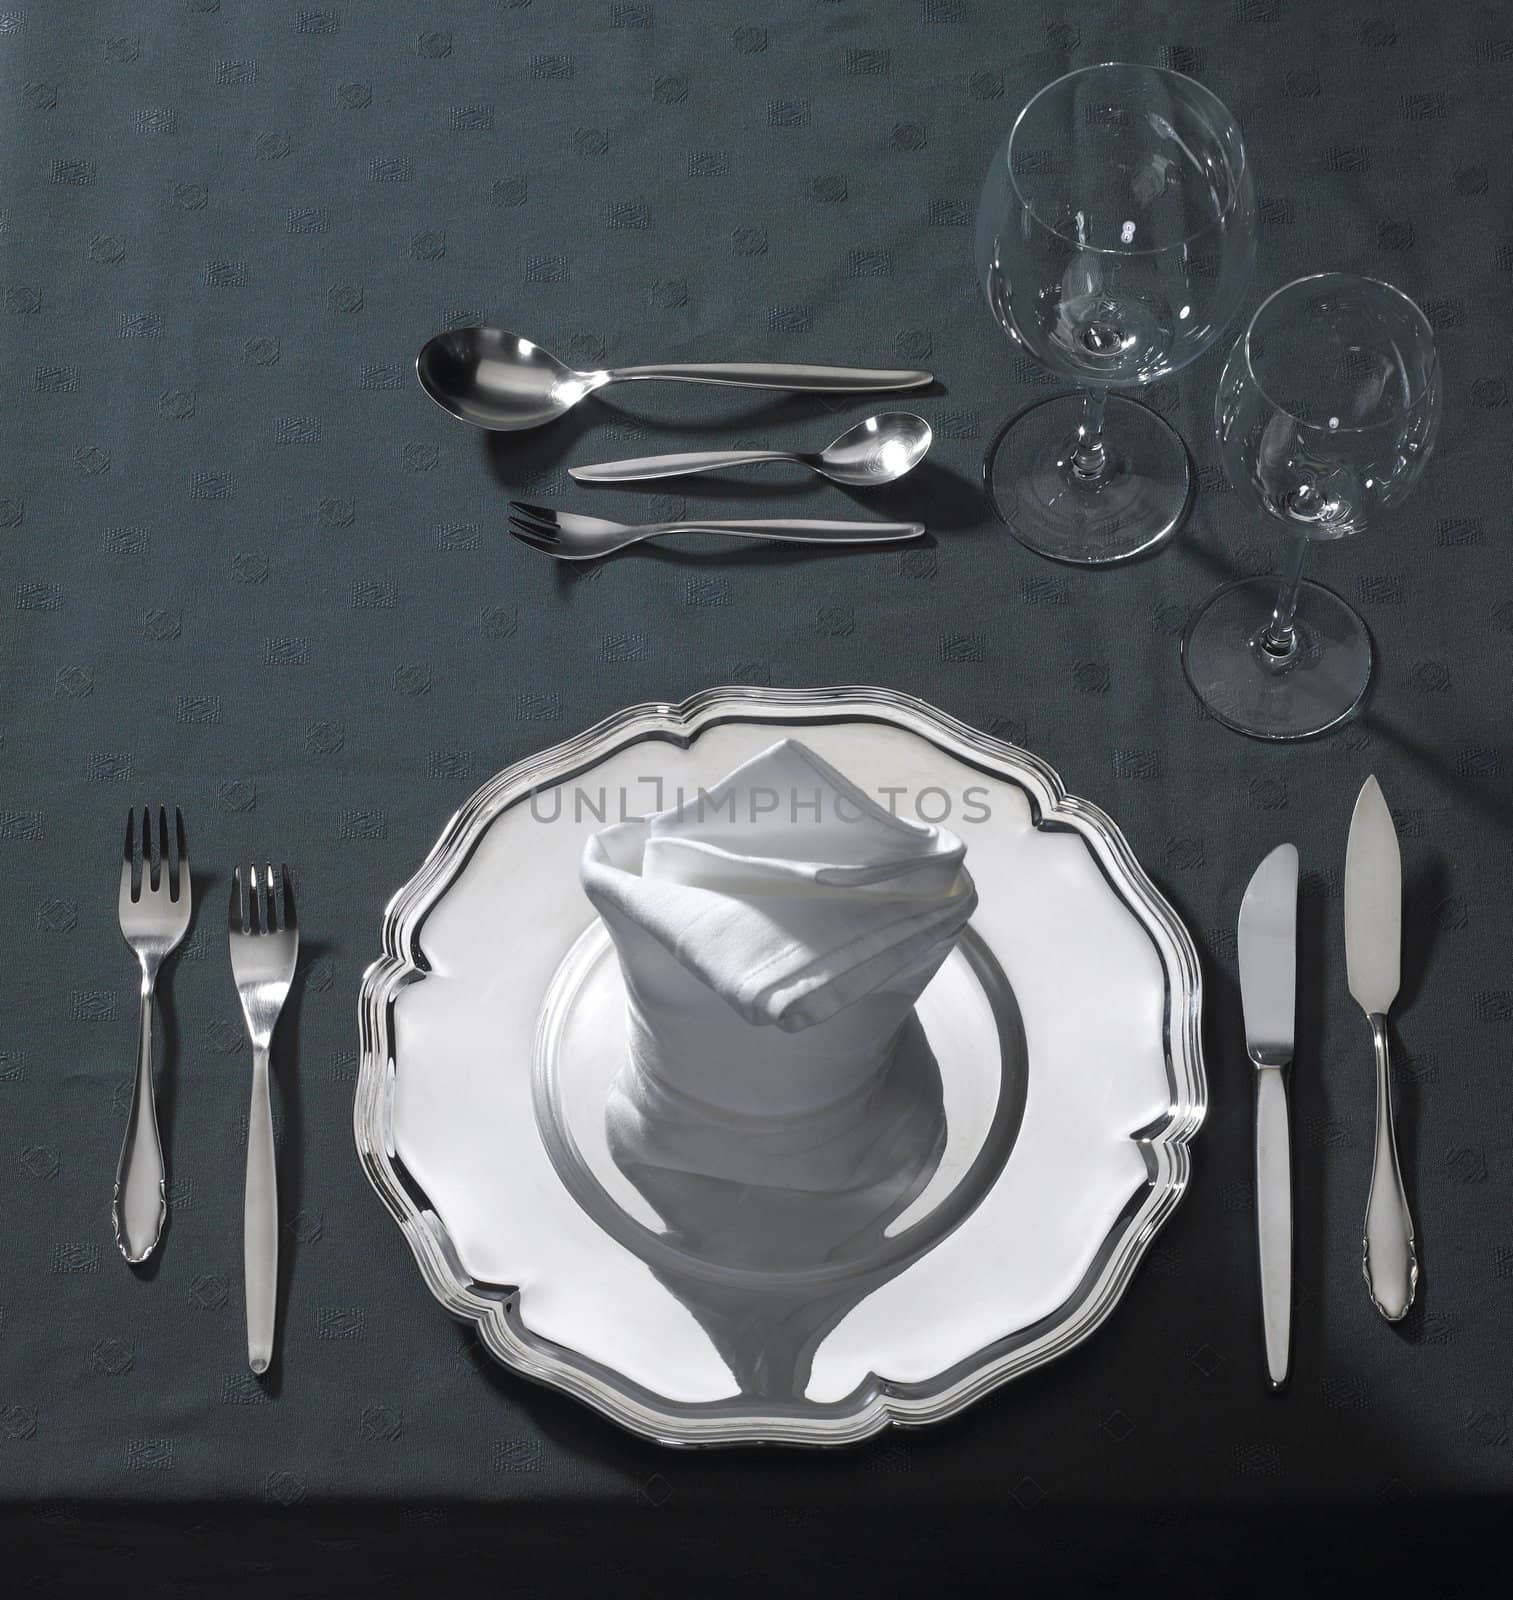 exclusive place setting on dark tablecloth by gewoldi